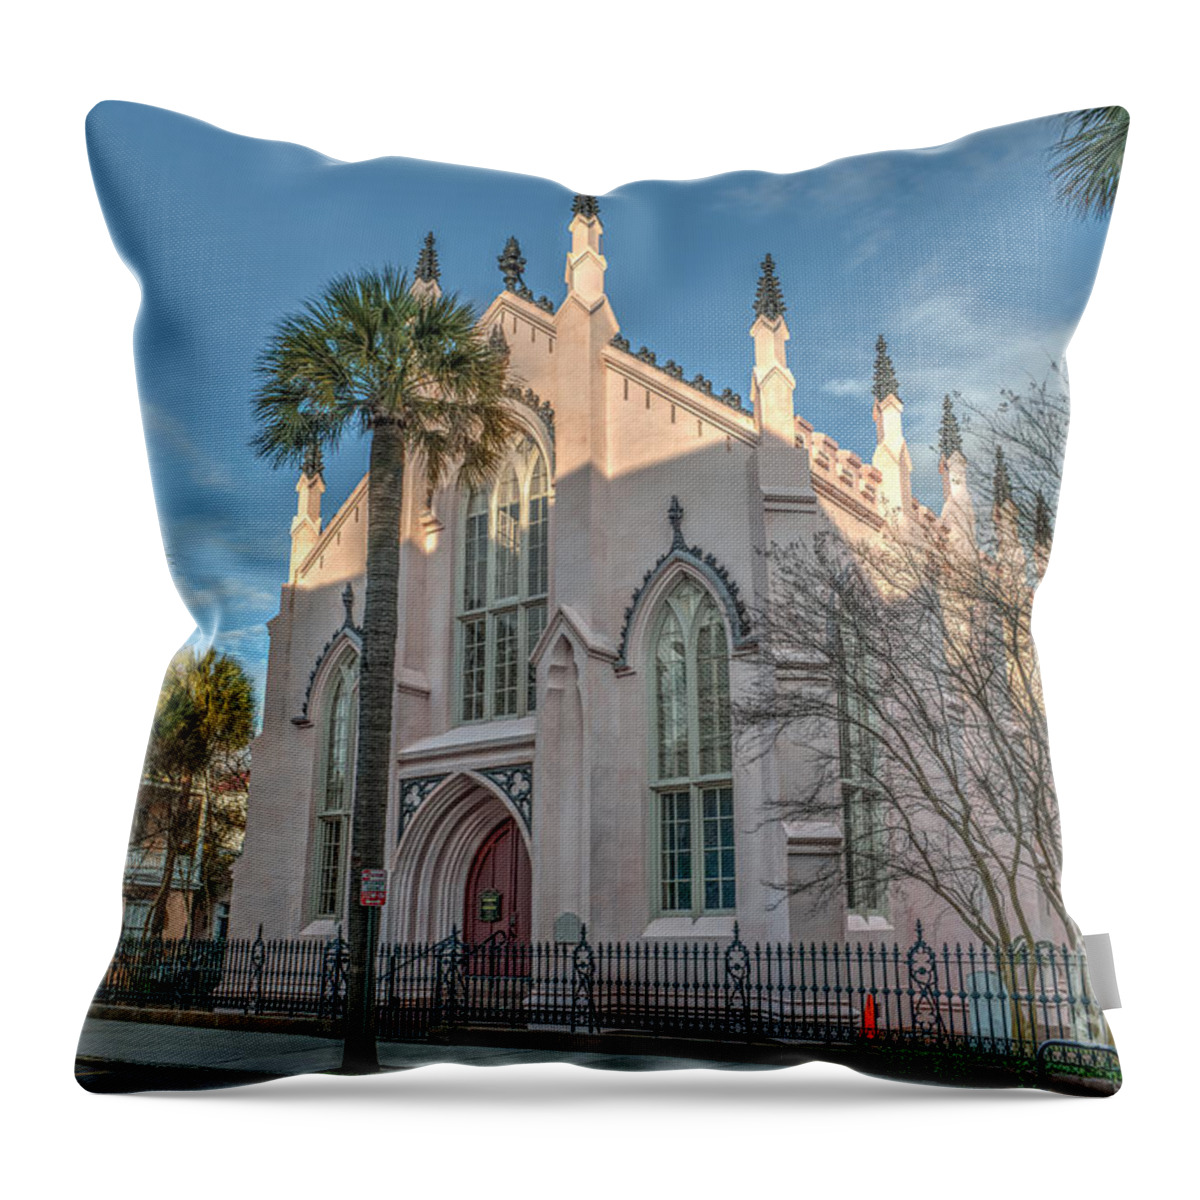 The Huguenot Church Throw Pillow featuring the photograph French Huguenot Church by Dale Powell